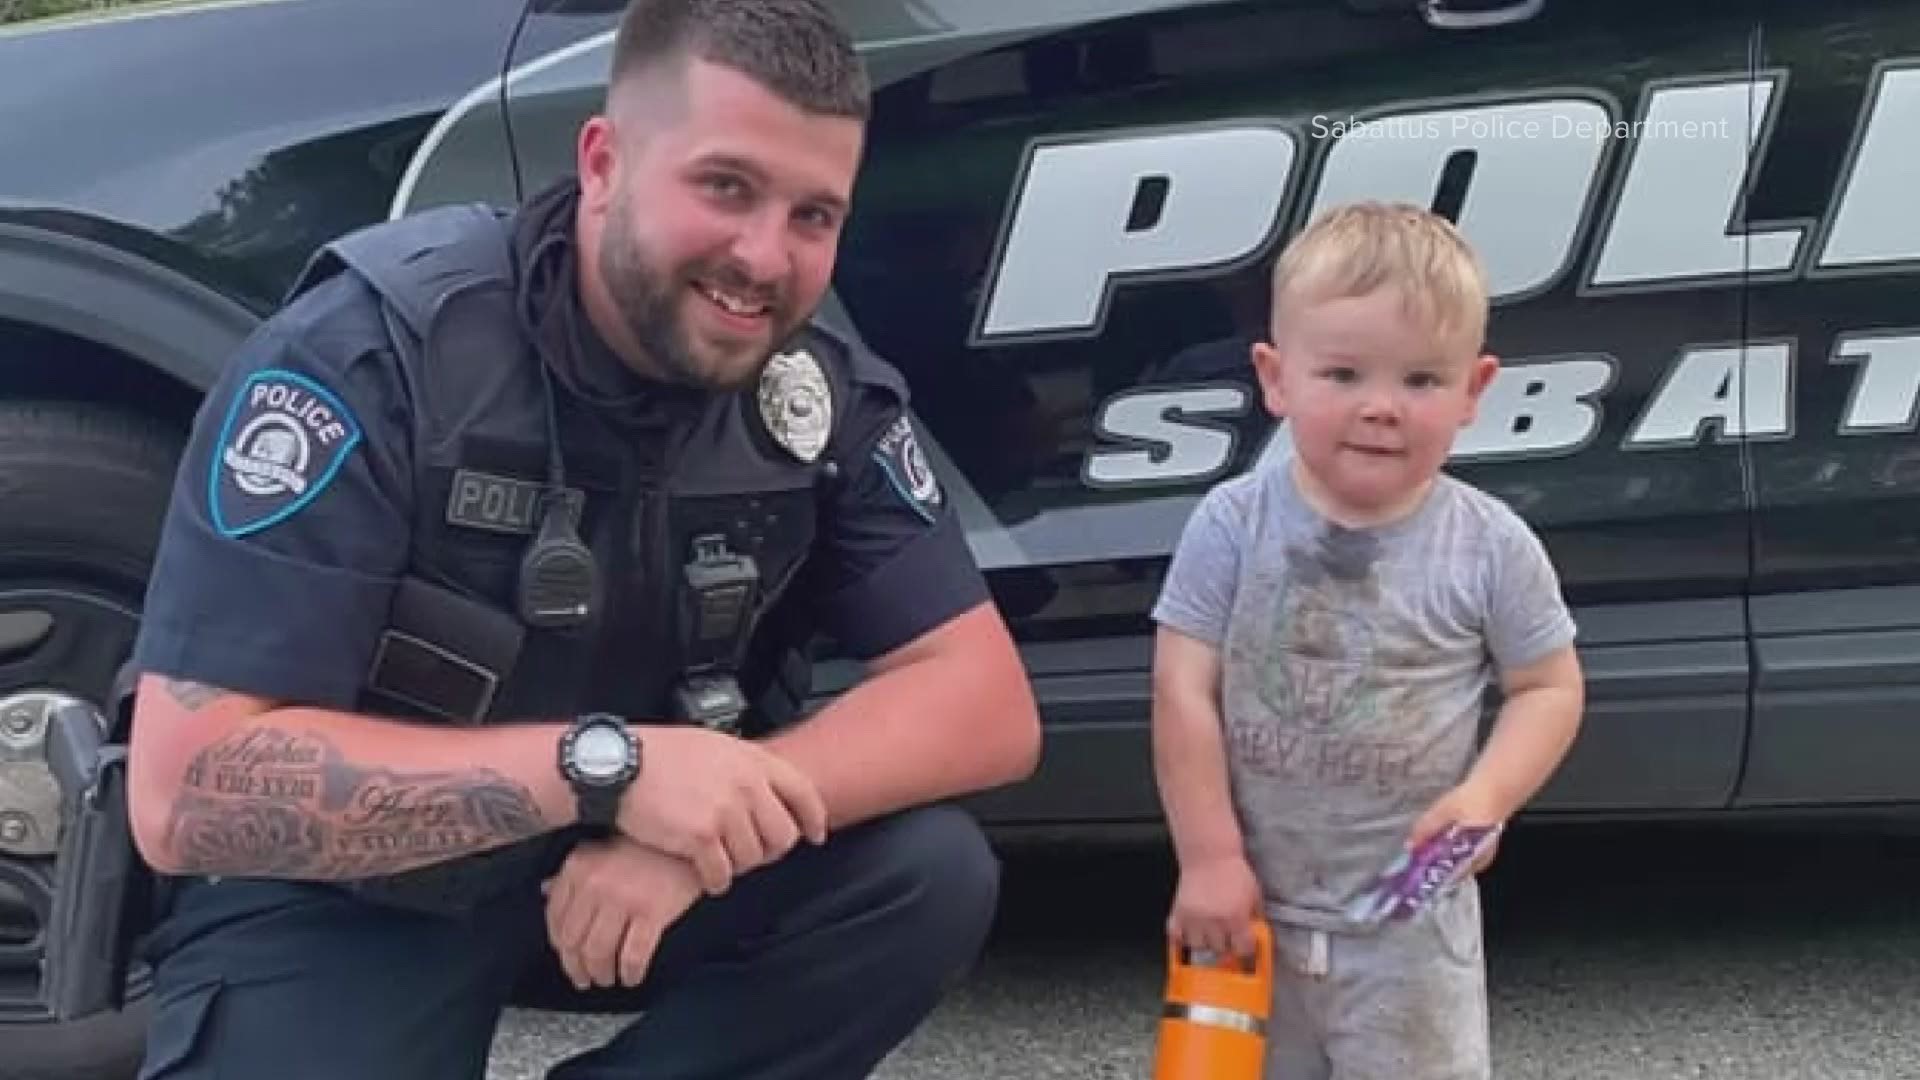 Officer Michael Rioux with the Sabattus Police Department wanted to make sure that even in the midst of tragedy, two-year-old Wyatt Field didn't miss his birthday.